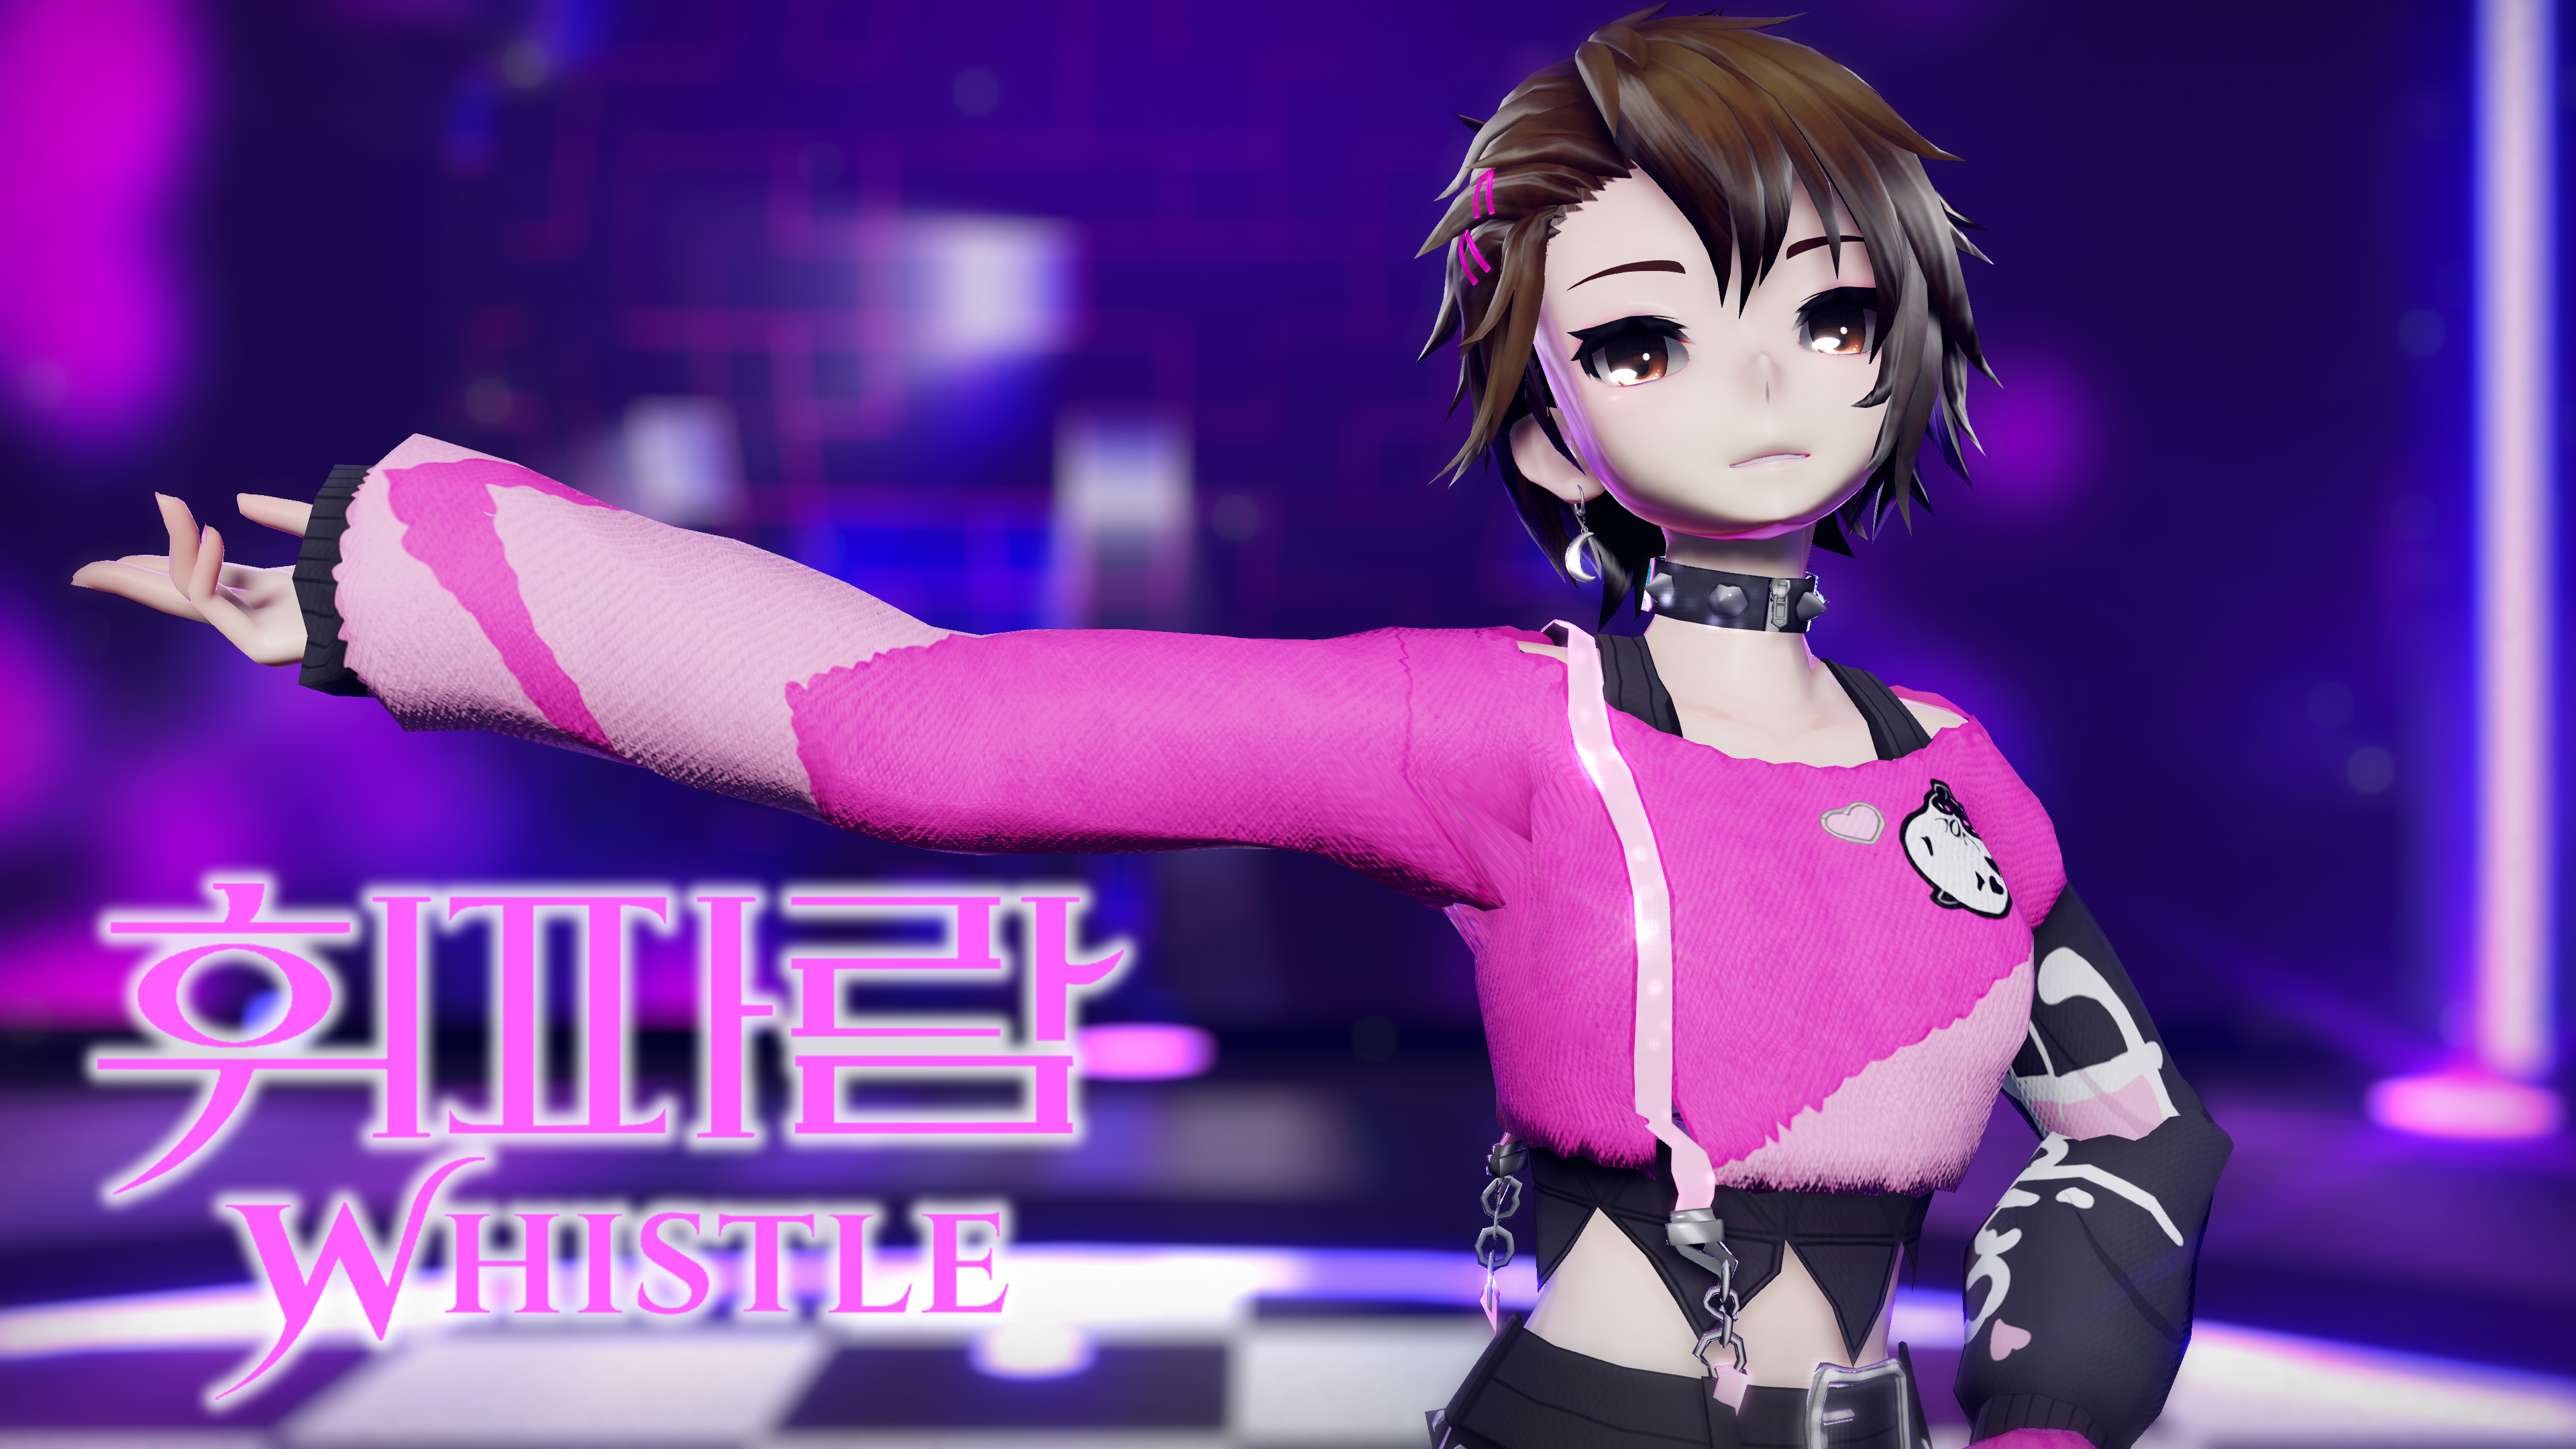 [MMD] BLACKPINK - WHISTLE [Motion DL] by NatsumiSempai, visual art